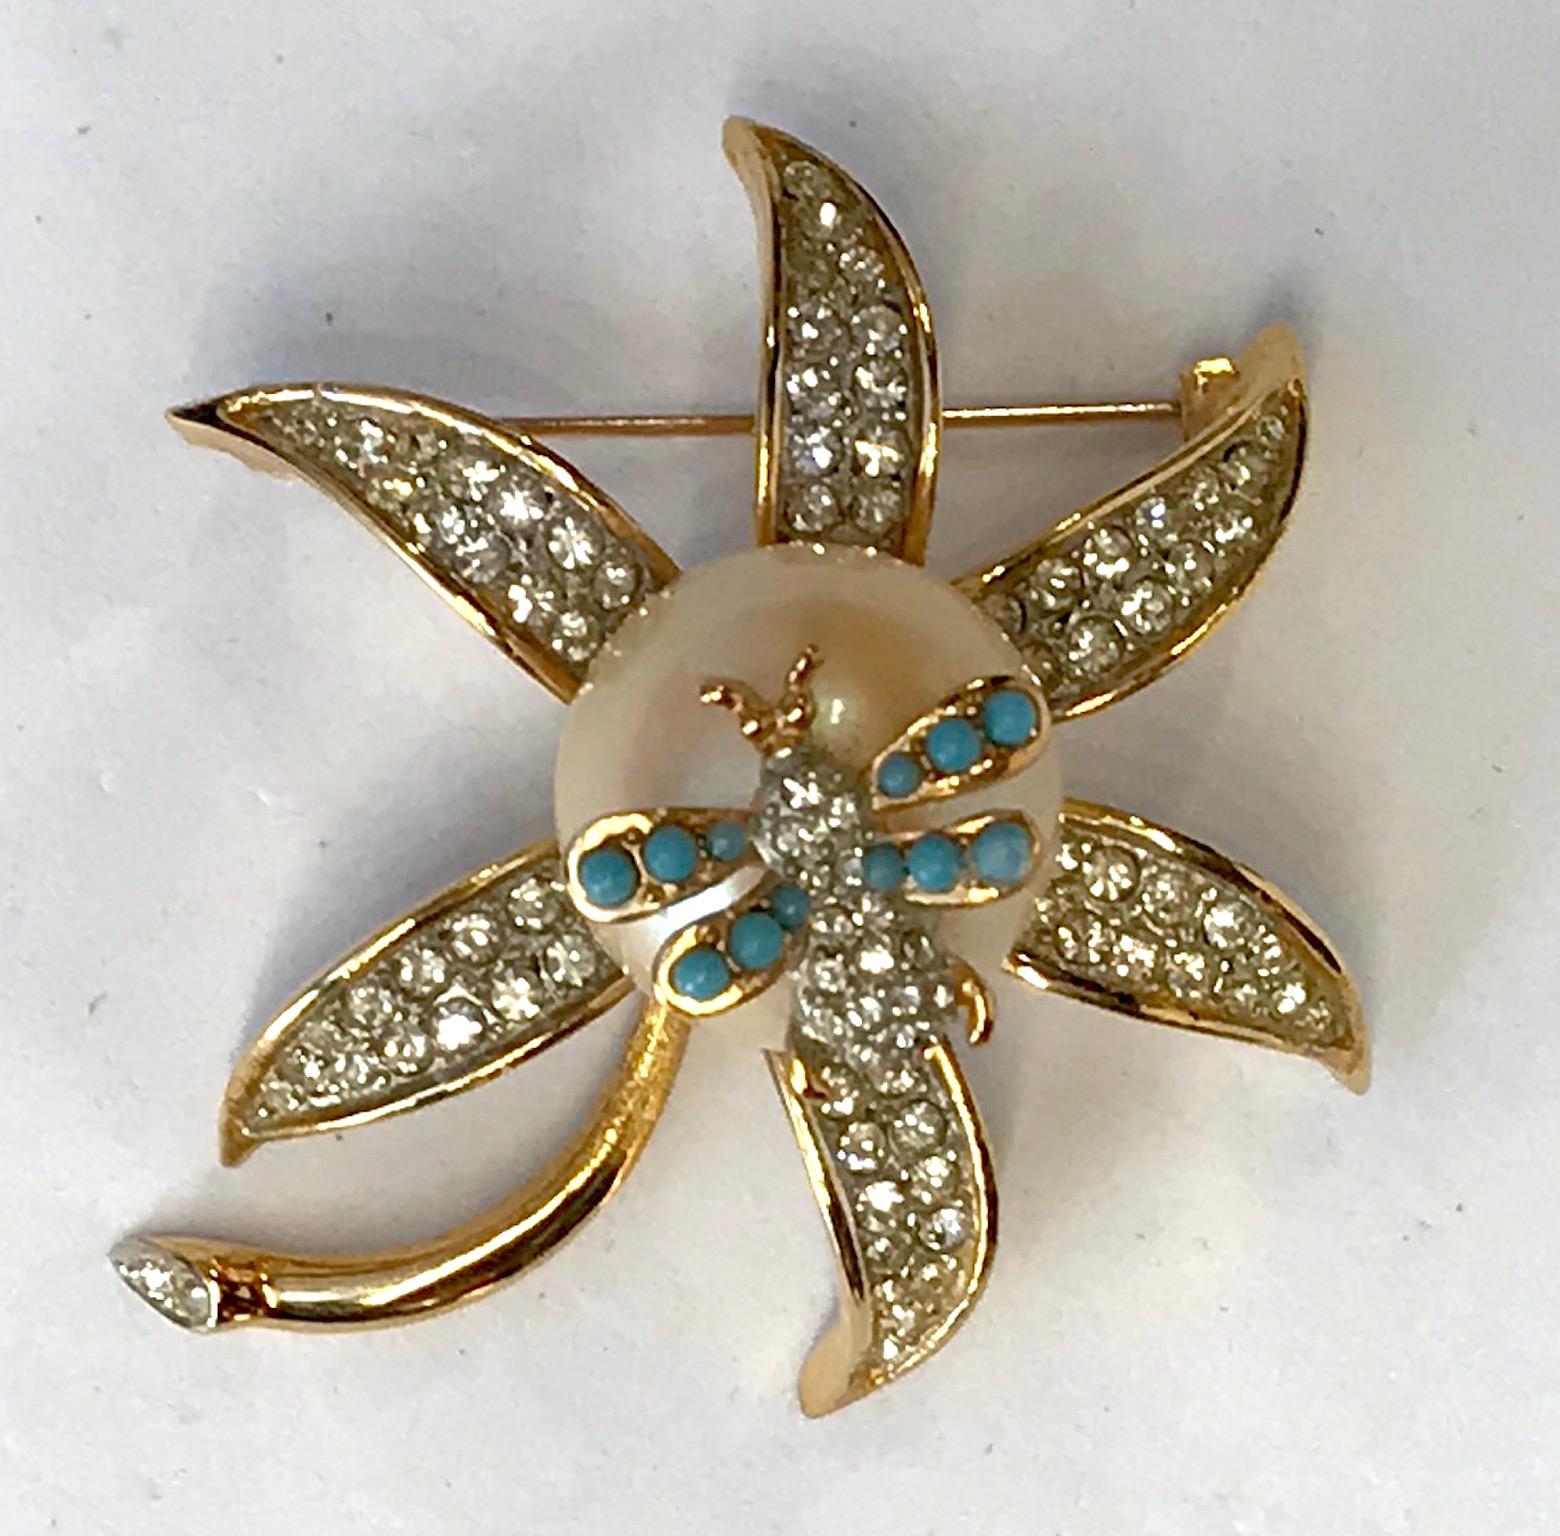 Three dimensional flower by Kenneth Jay Lane prior to 1973. Gold tone with petals in pave' rhinestones. In the center is set a large 19 mm faux pearl. Atop of the pearl is mounted a .62 x .75 of an inch bee with rhinestone body and turquoise color